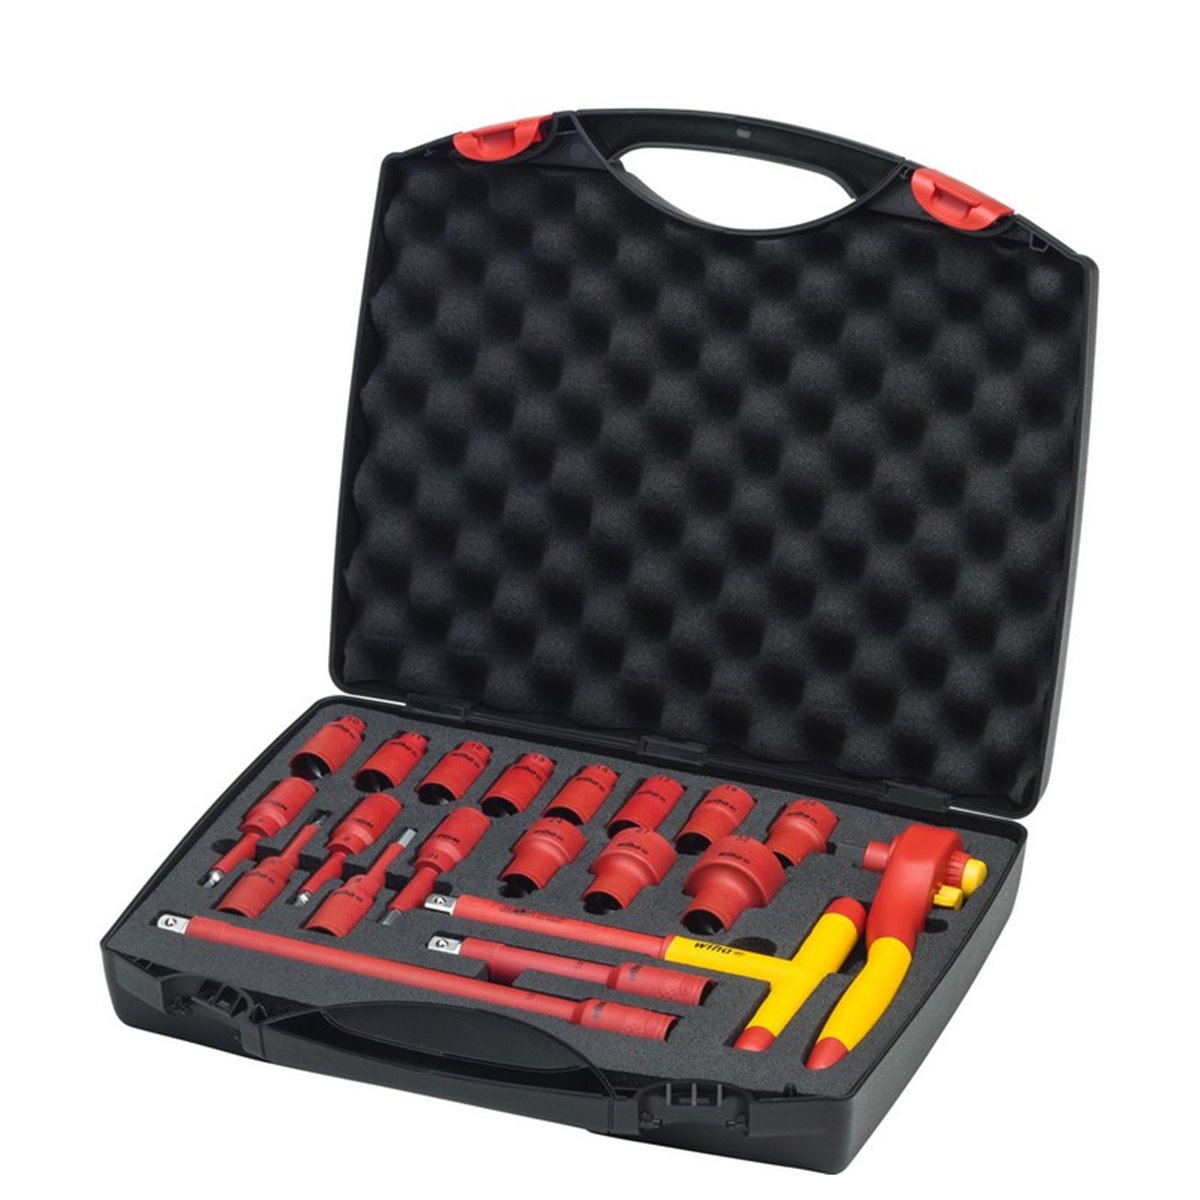 Wiha Ratchet wrench set insulated 1/2” 21-pcs. incl. case (43024)